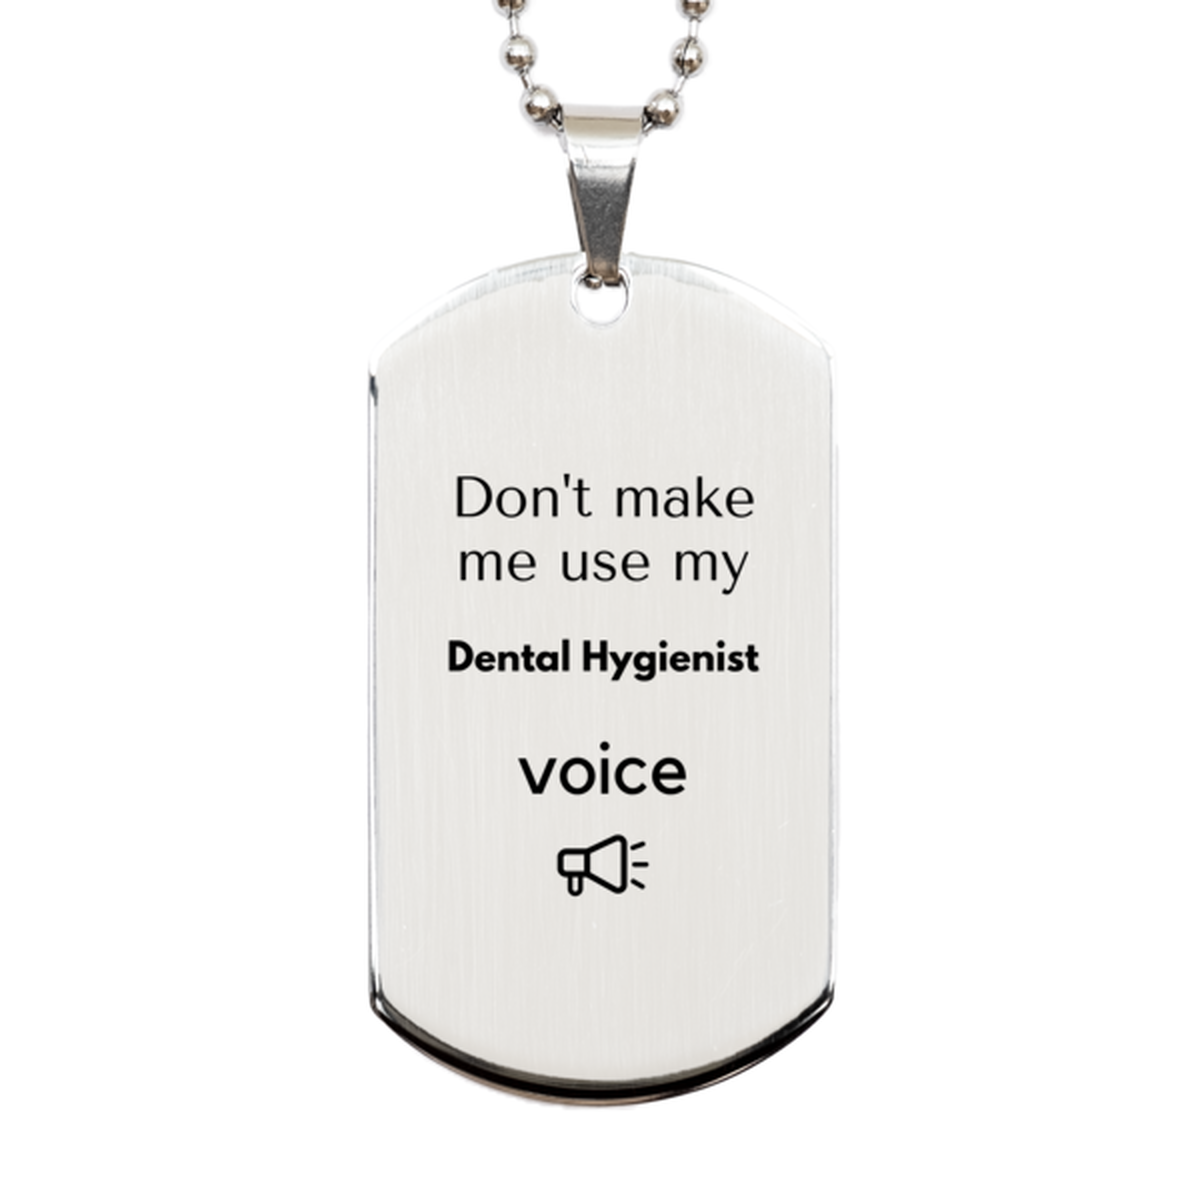 Don't make me use my Dental Hygienist voice, Sarcasm Dental Hygienist Gifts, Christmas Dental Hygienist Silver Dog Tag Birthday Unique Gifts For Dental Hygienist Coworkers, Men, Women, Colleague, Friends